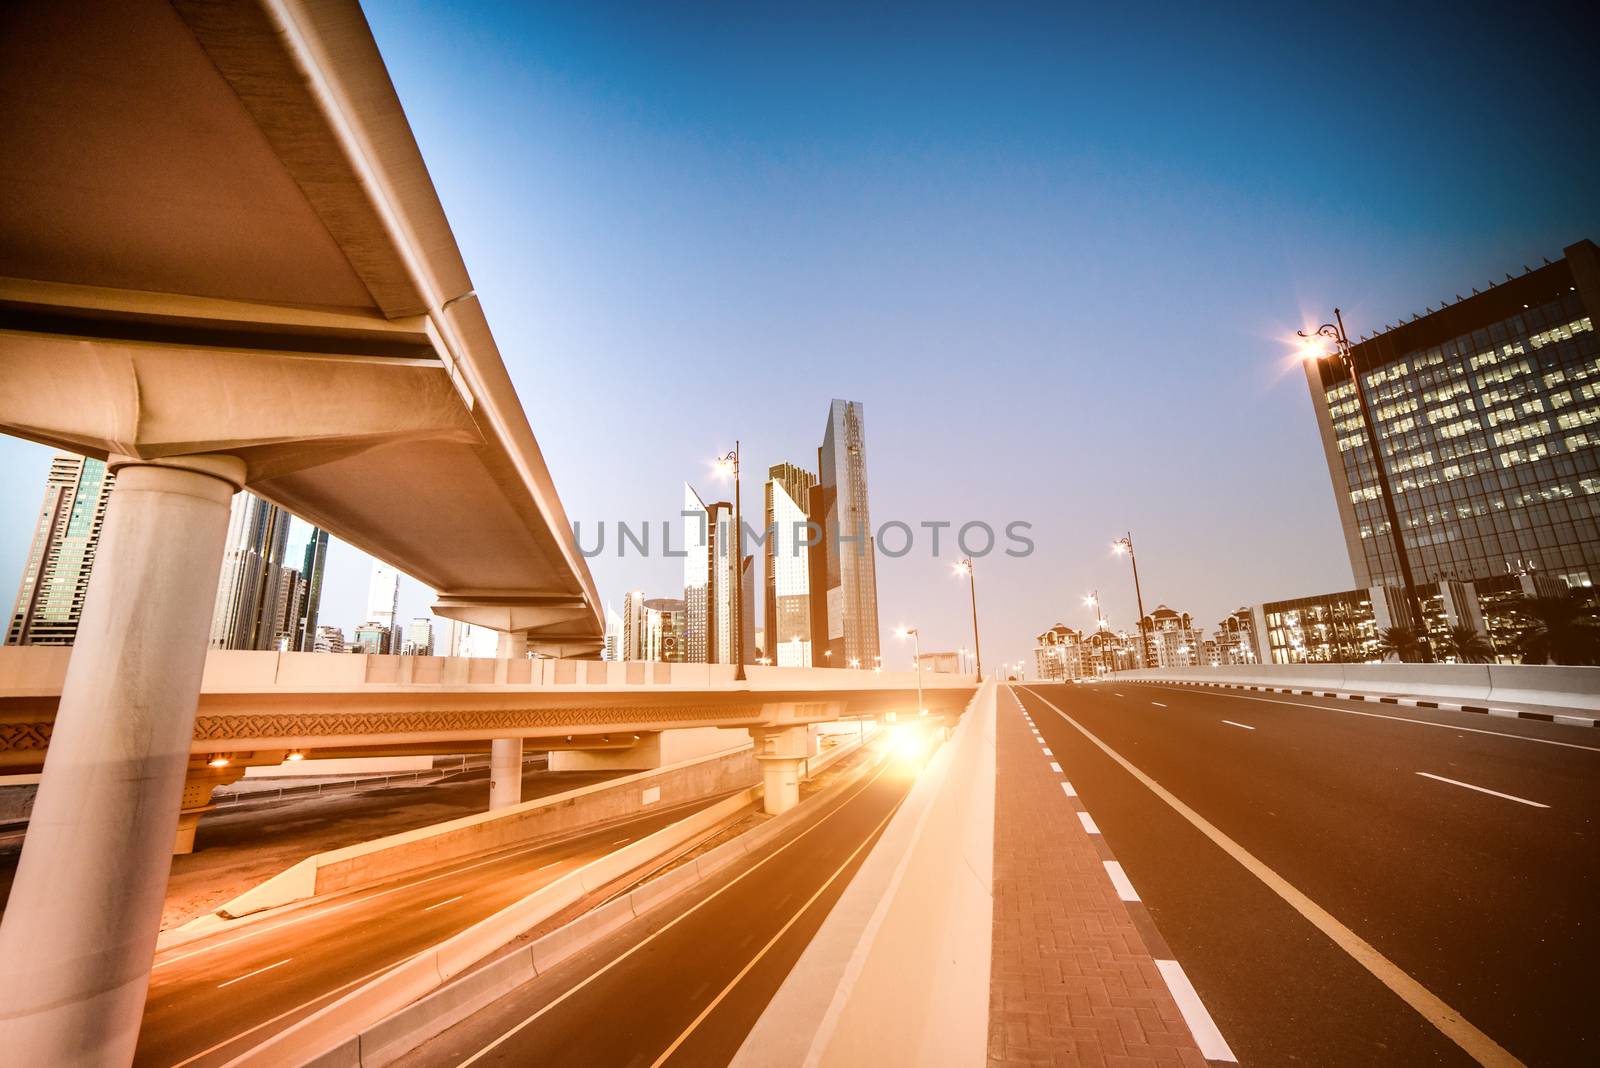 evening landscape of a modern city with bridges, roads and skyscrapers